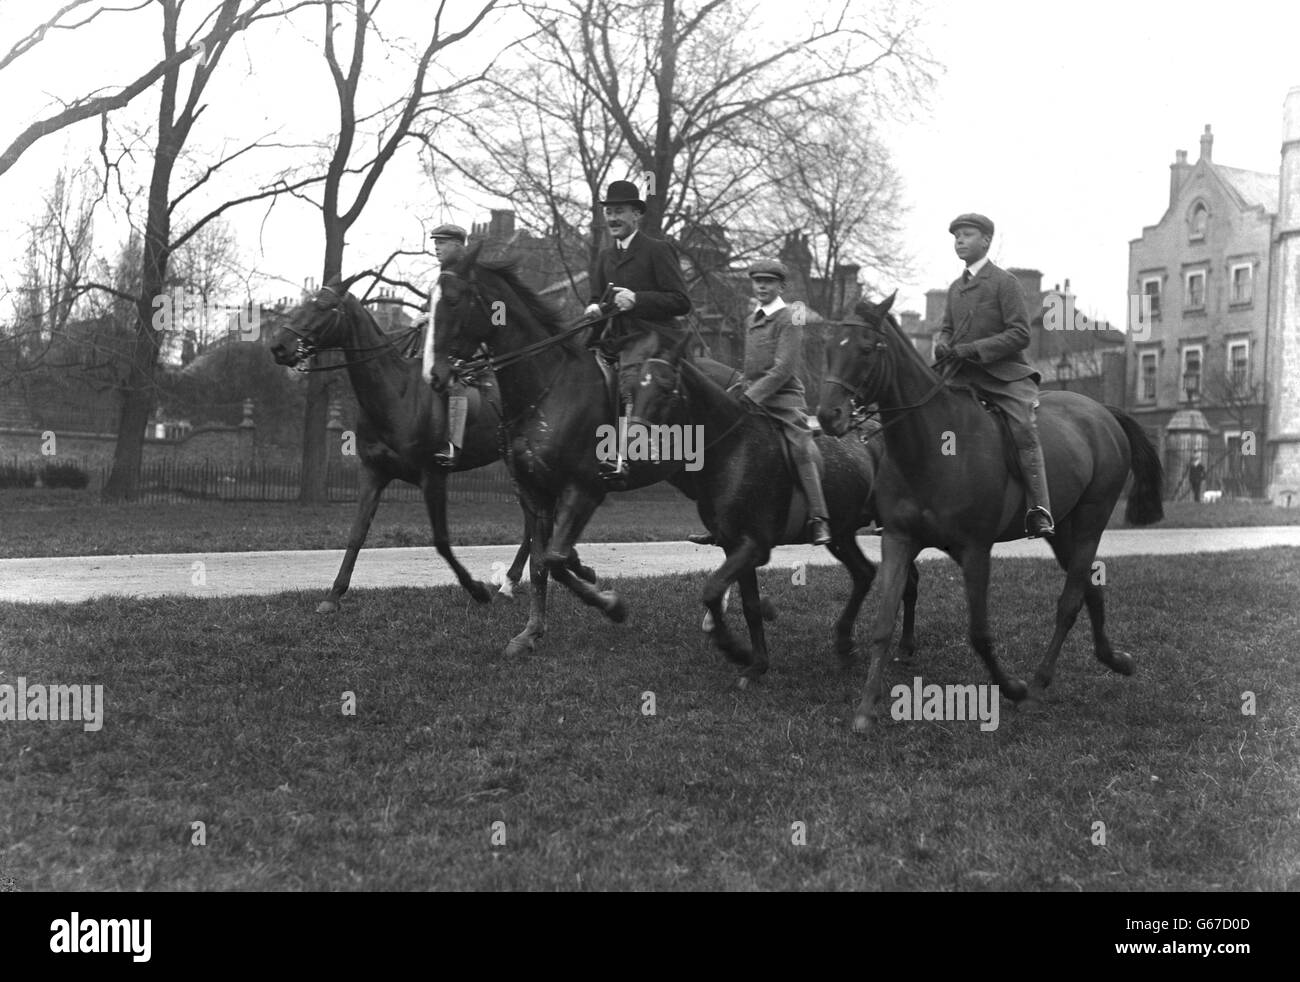 Royalty - Horseback riding - Prince of Wales, Major Clive Wigram, Prince Henry and Prince Albert. The Prince of Wales, Major Clive Wigram, Prince Henry and Prince Albert out riding on horses. 1911. Stock Photo